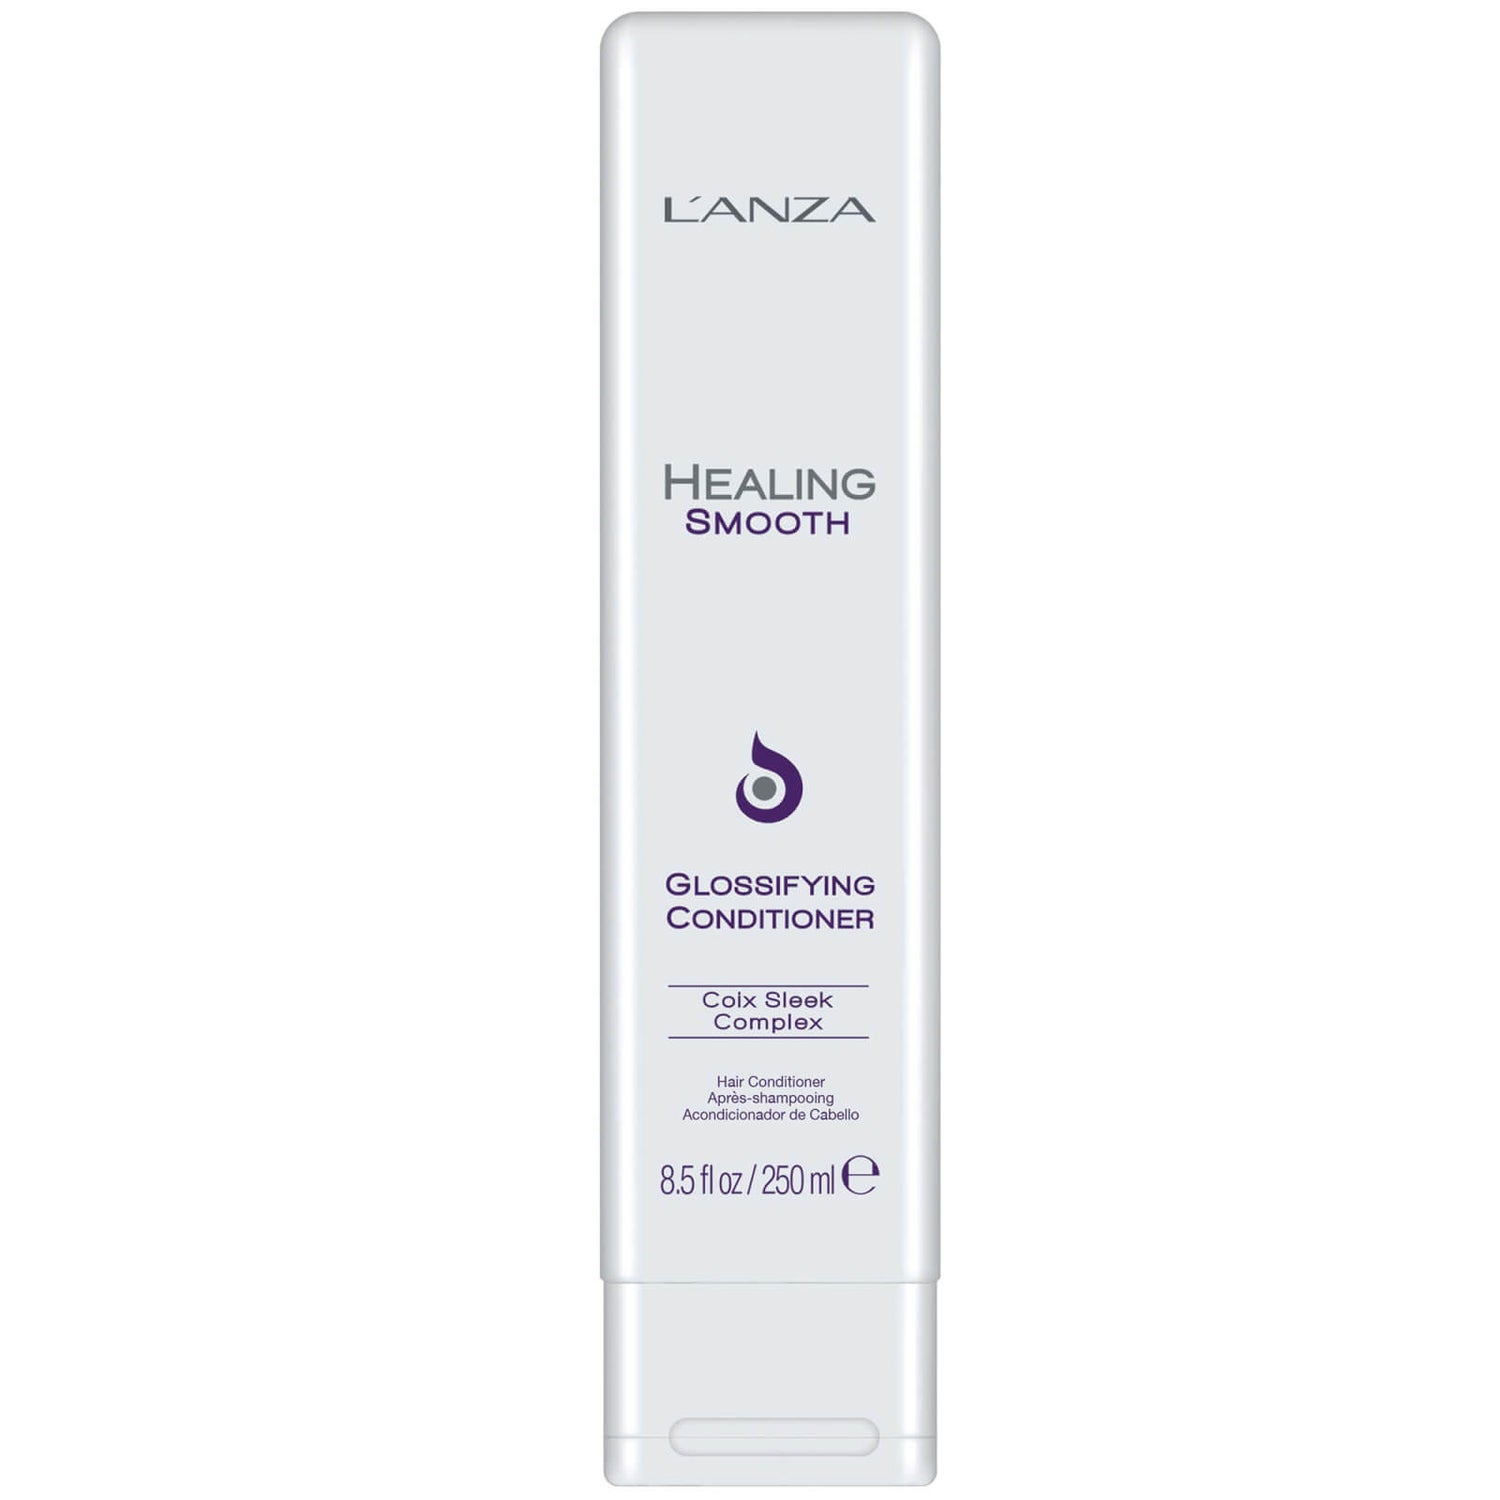 L'Anza Healing Smooth Glossifying Conditioner (250 ml)